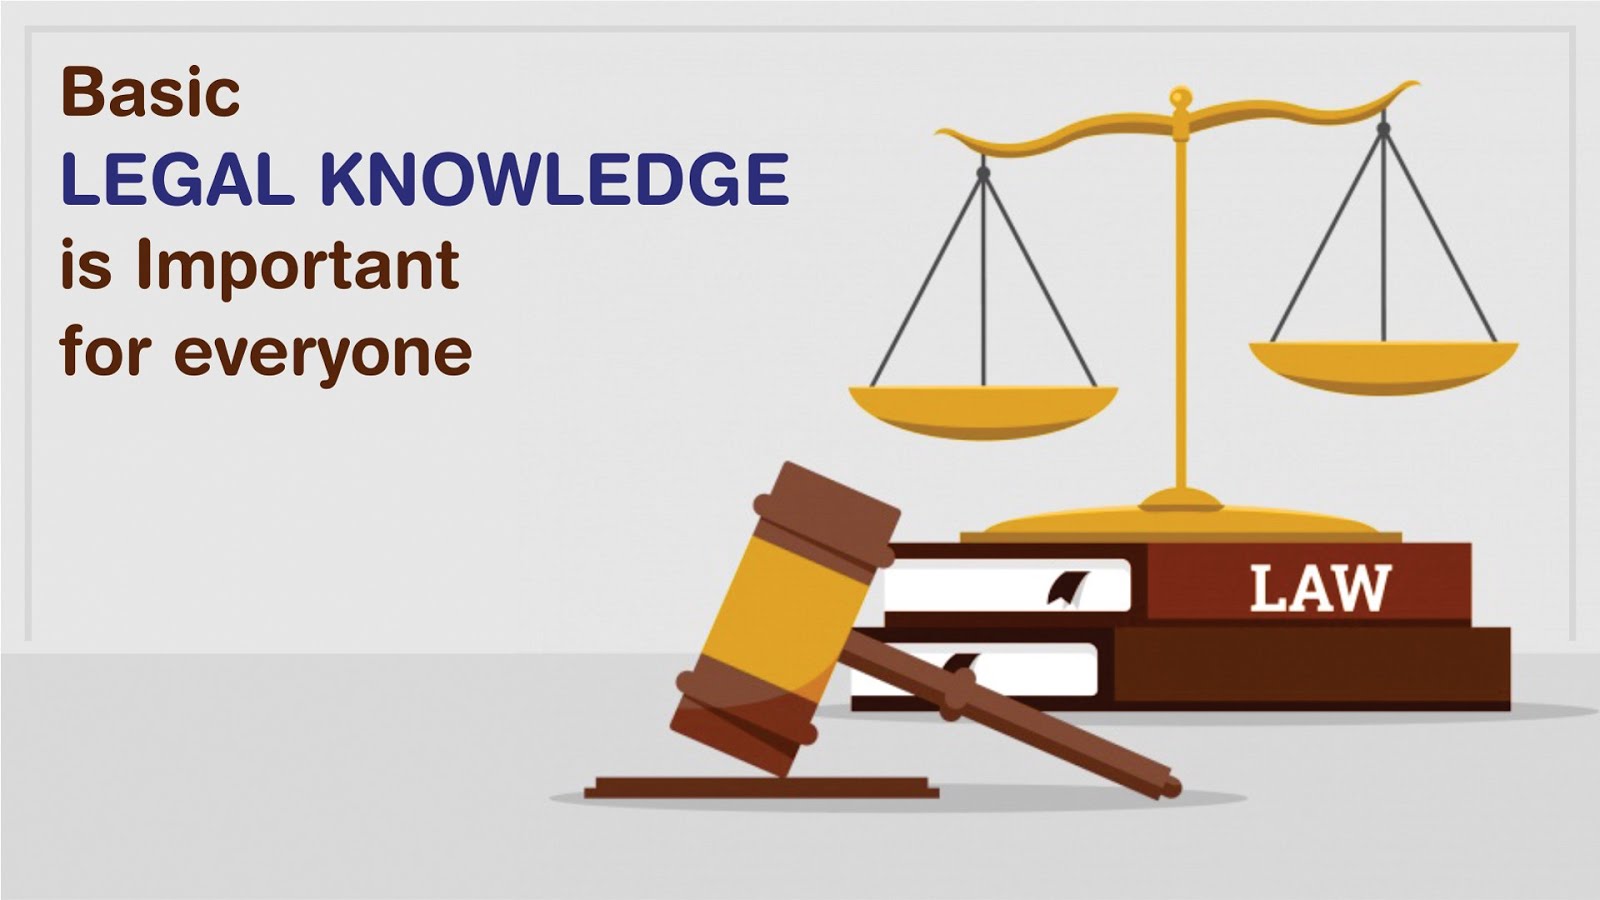 LEGAL KNOWLEDGE